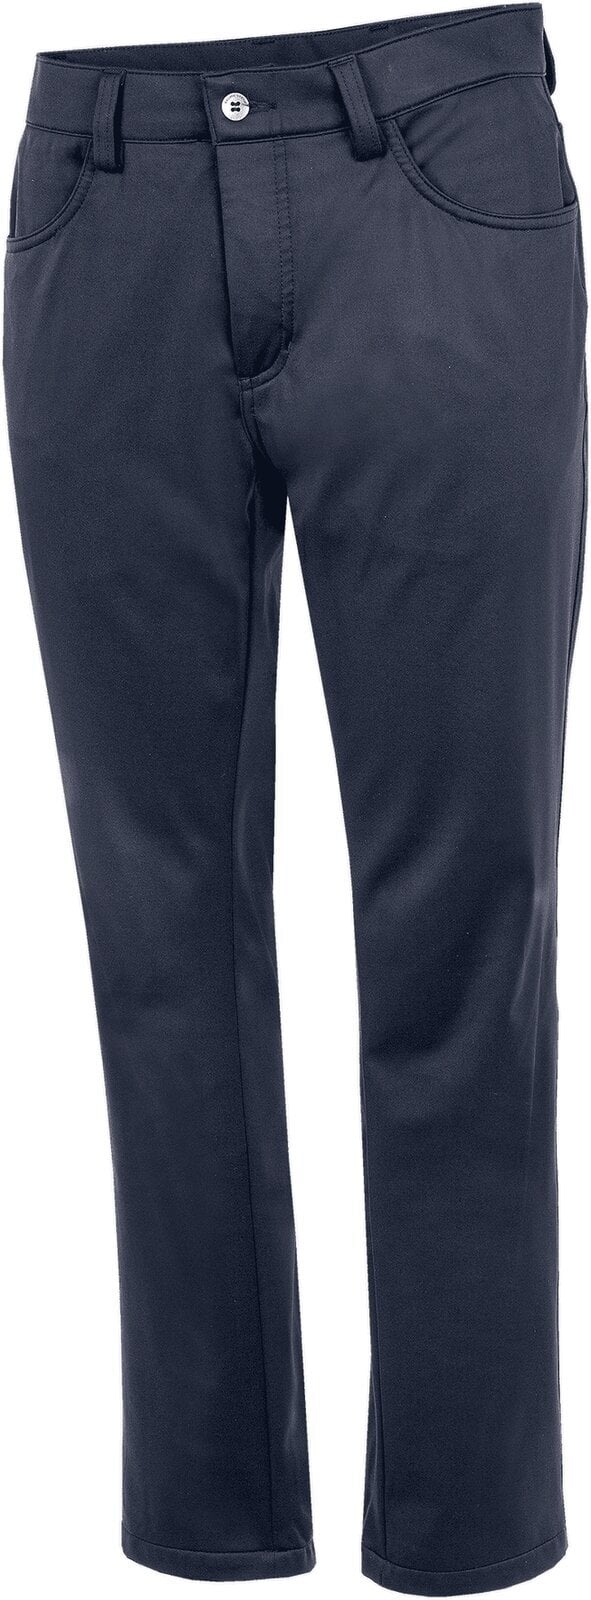 Kalhoty Galvin Green Lane MensWindproof And Water Repellent Pants Navy 34/32